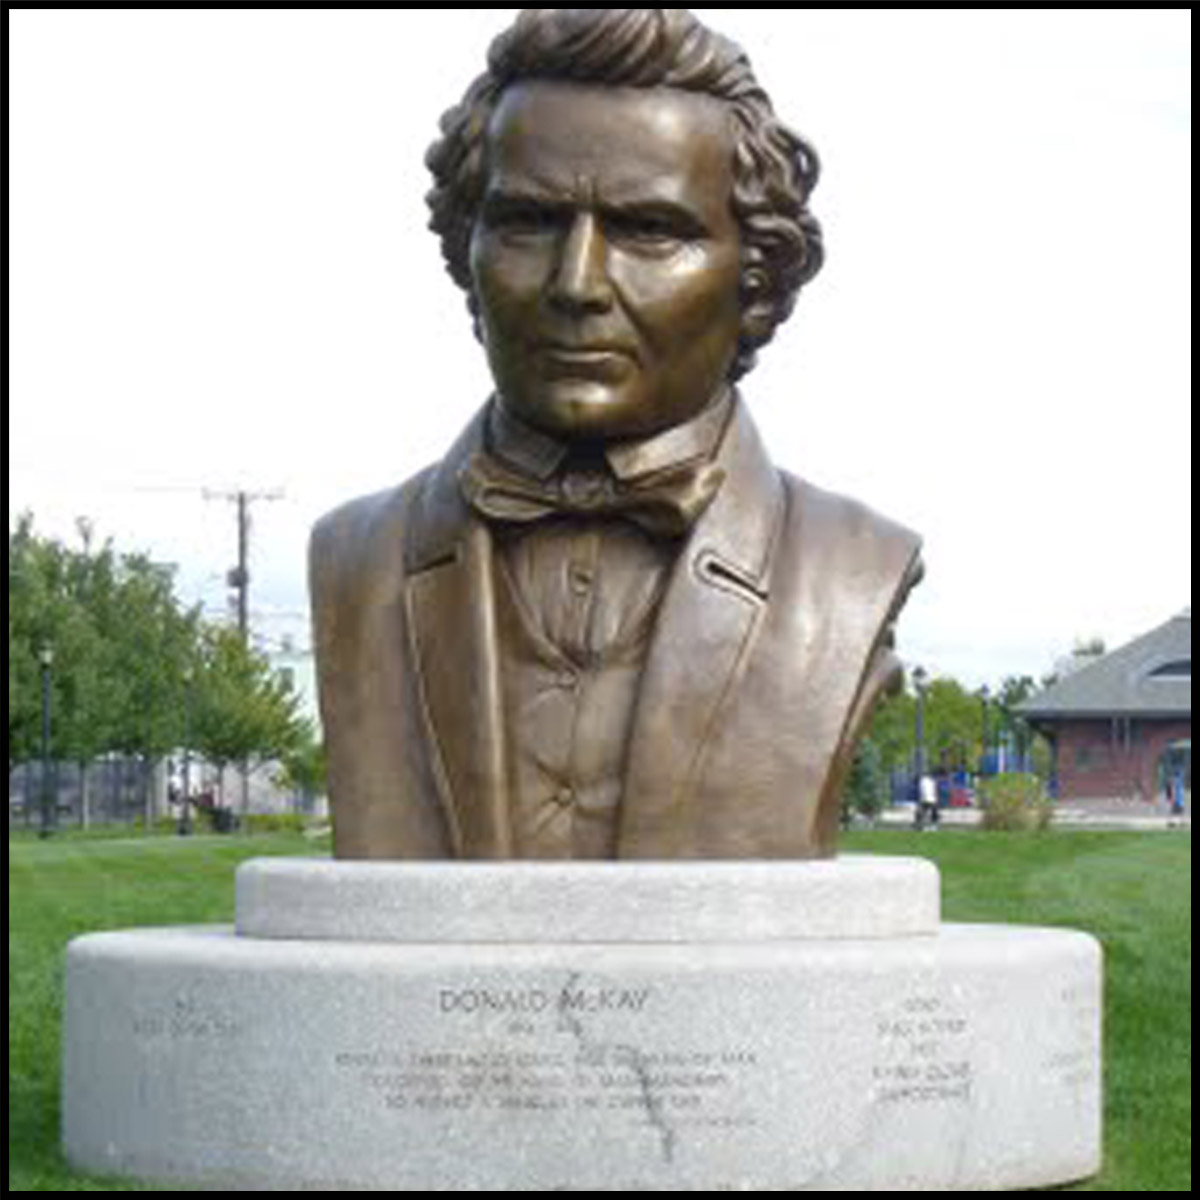 photo of monumental bronze bust of Donald McKay on stone base outdoors on grass